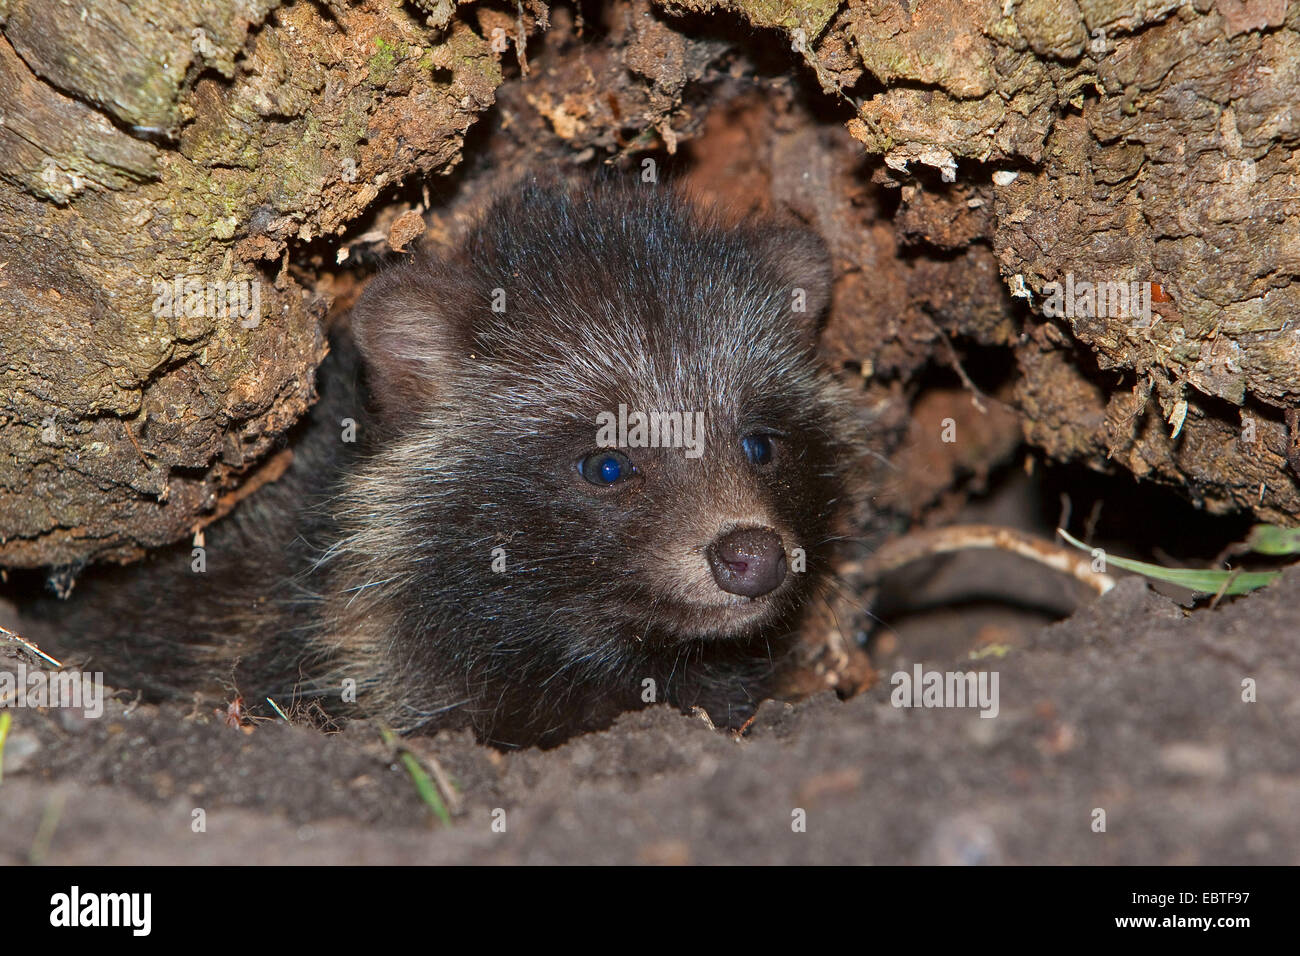 raccoon dog (Nyctereutes procyonoides), young raccoon dog in tree hole, Germany Stock Photo